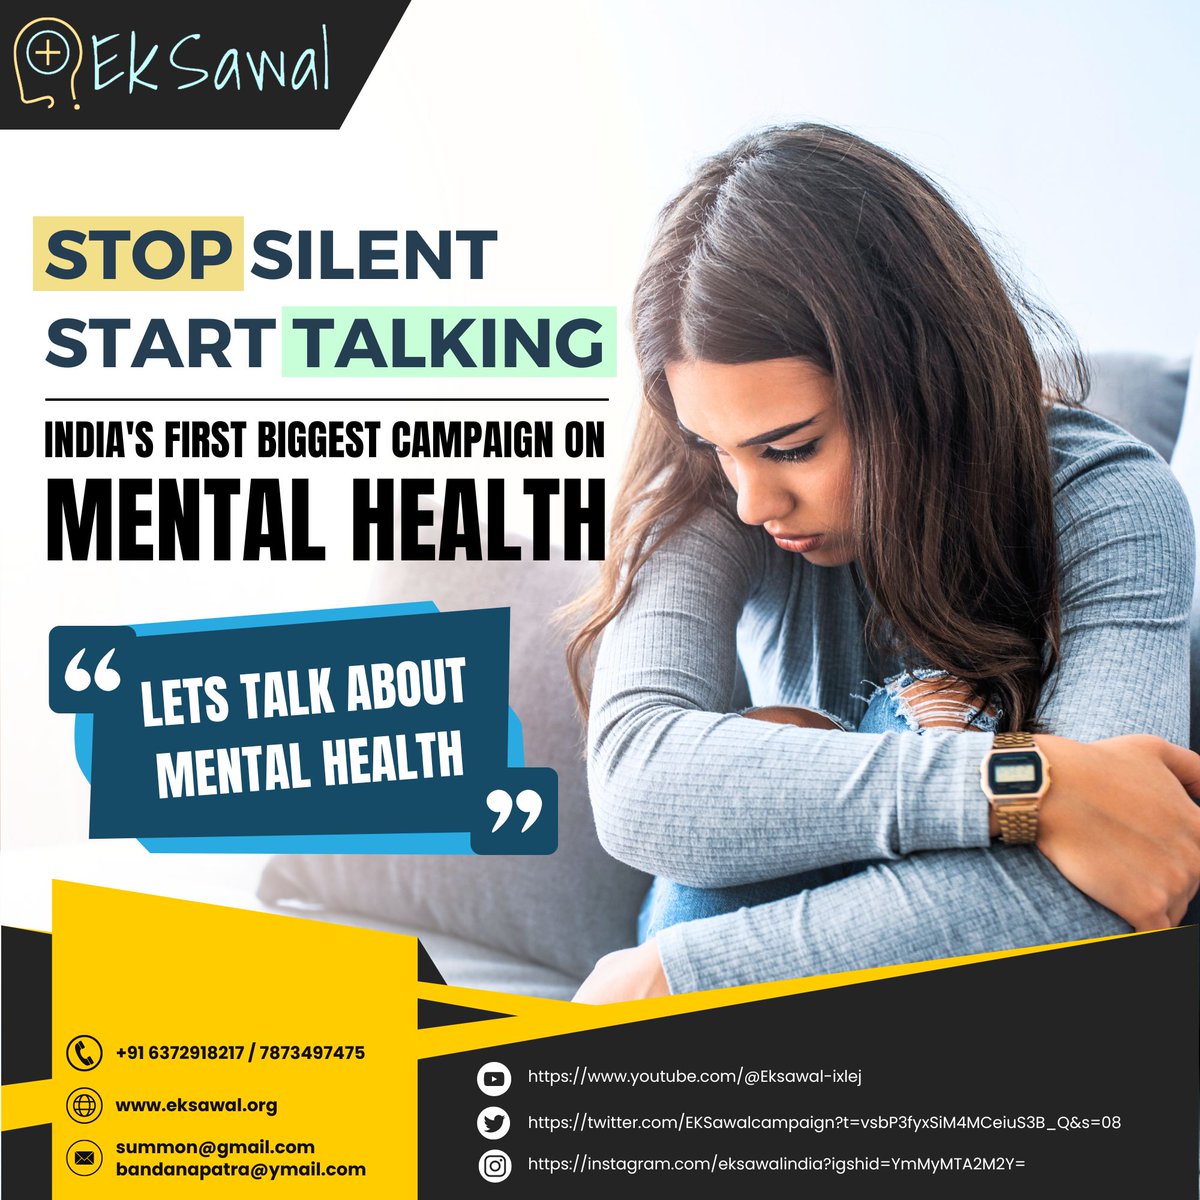 The Ek Sawal campaign is shining a spotlight on mental health issues, reminding us that it's okay to not be okay. Your story could inspire someone else's journey to recovery. Share and uplift.
#MentalHealthMatters #EkSawalSupport #EmpowerMinds #SpeakUpIndia #eksawal